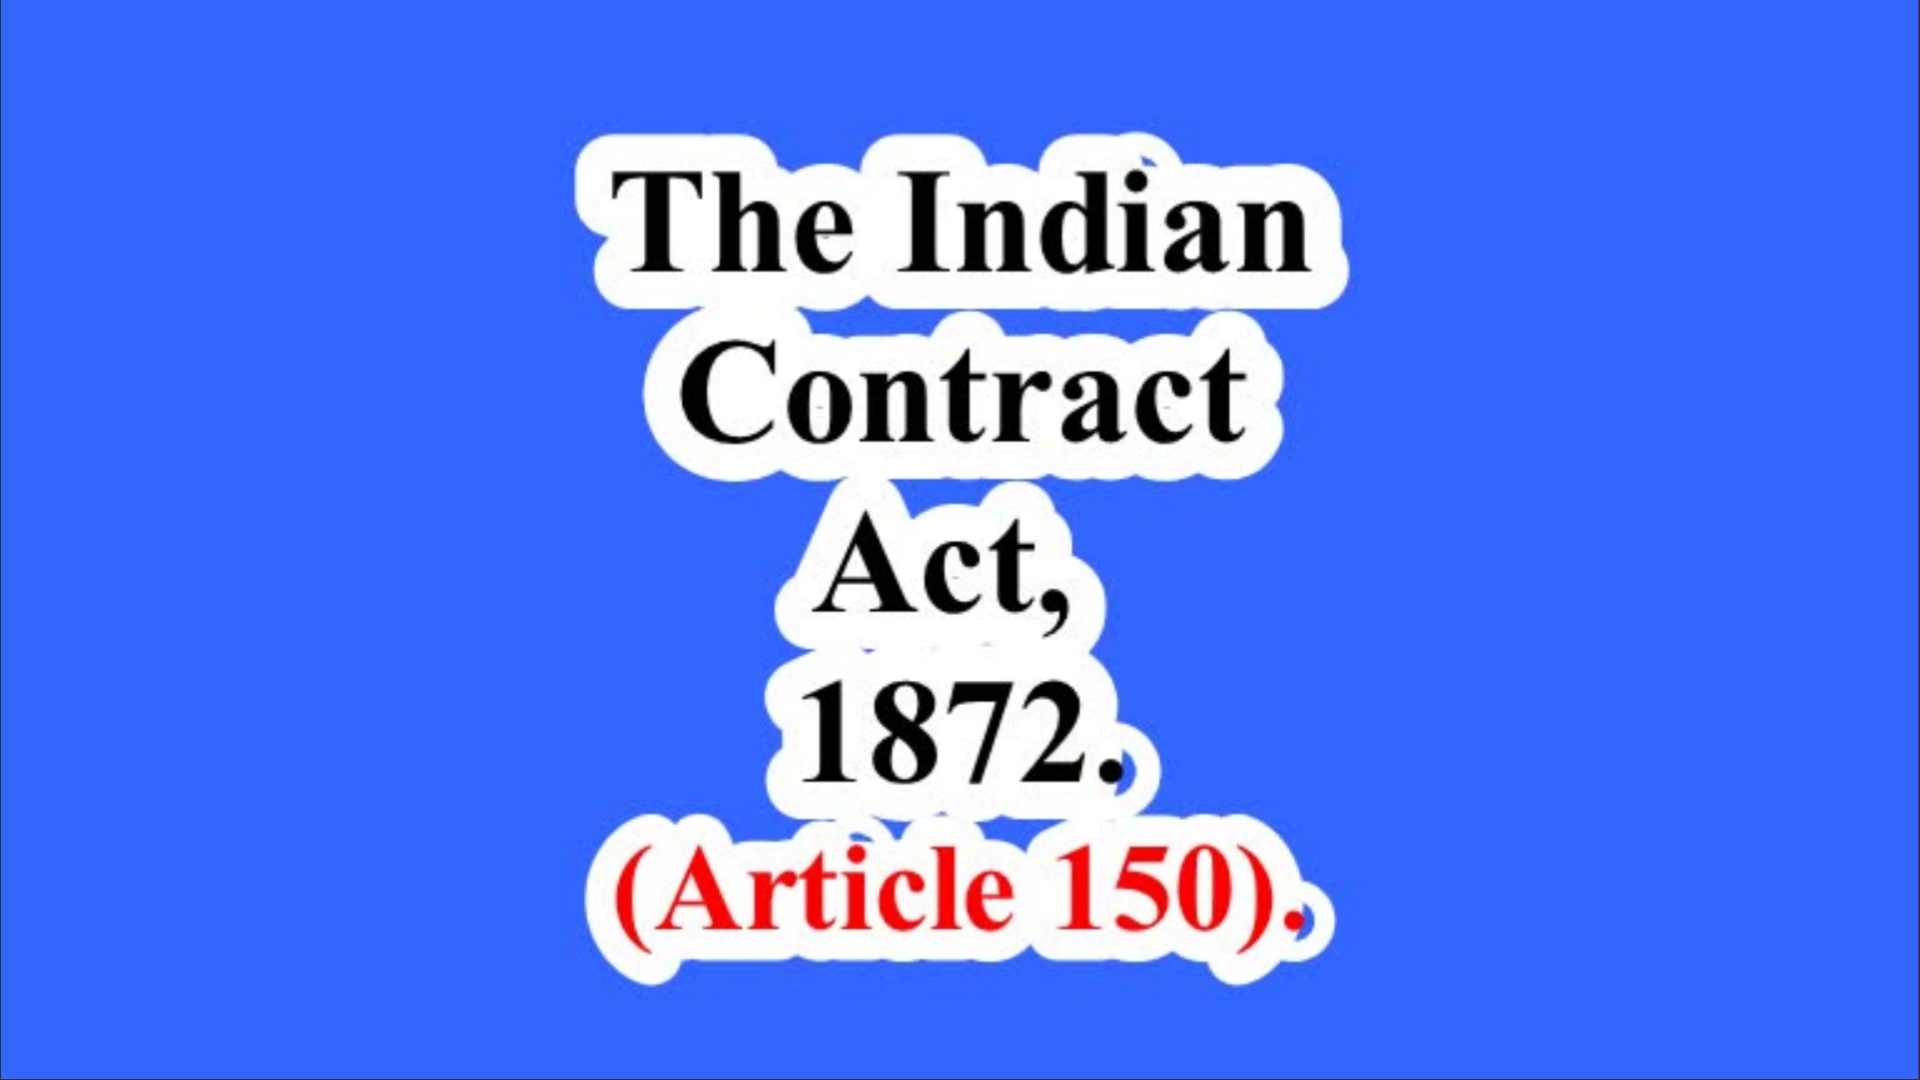 The Indian Contract Act, 1872. (Article 150).